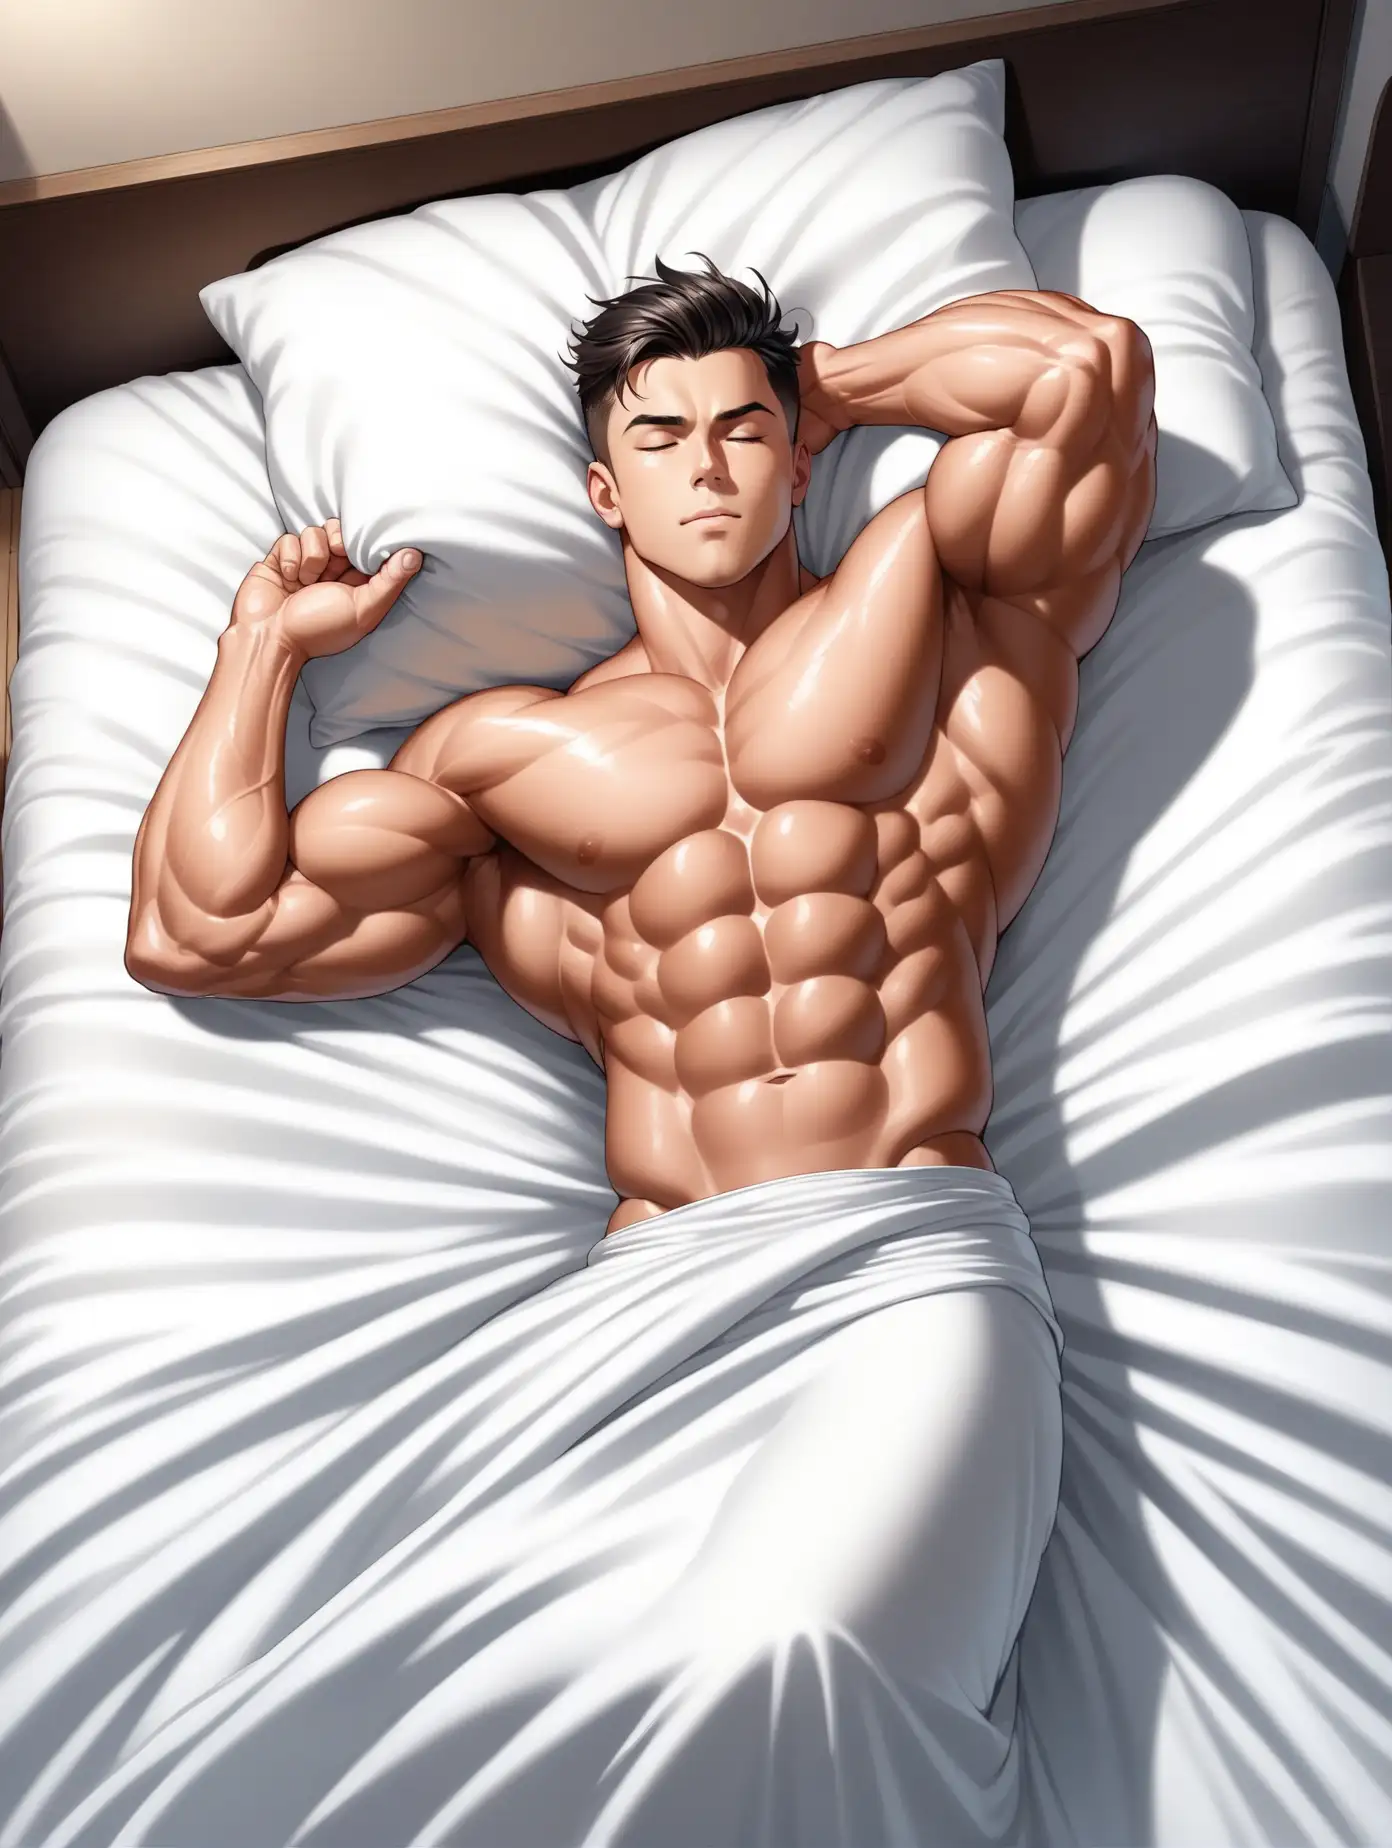 muscle male sleep, Broad shoulders, strong muscles, white thin blanket, ceiling view,  muscle bulge, Lying down, whole body, black crew hair style